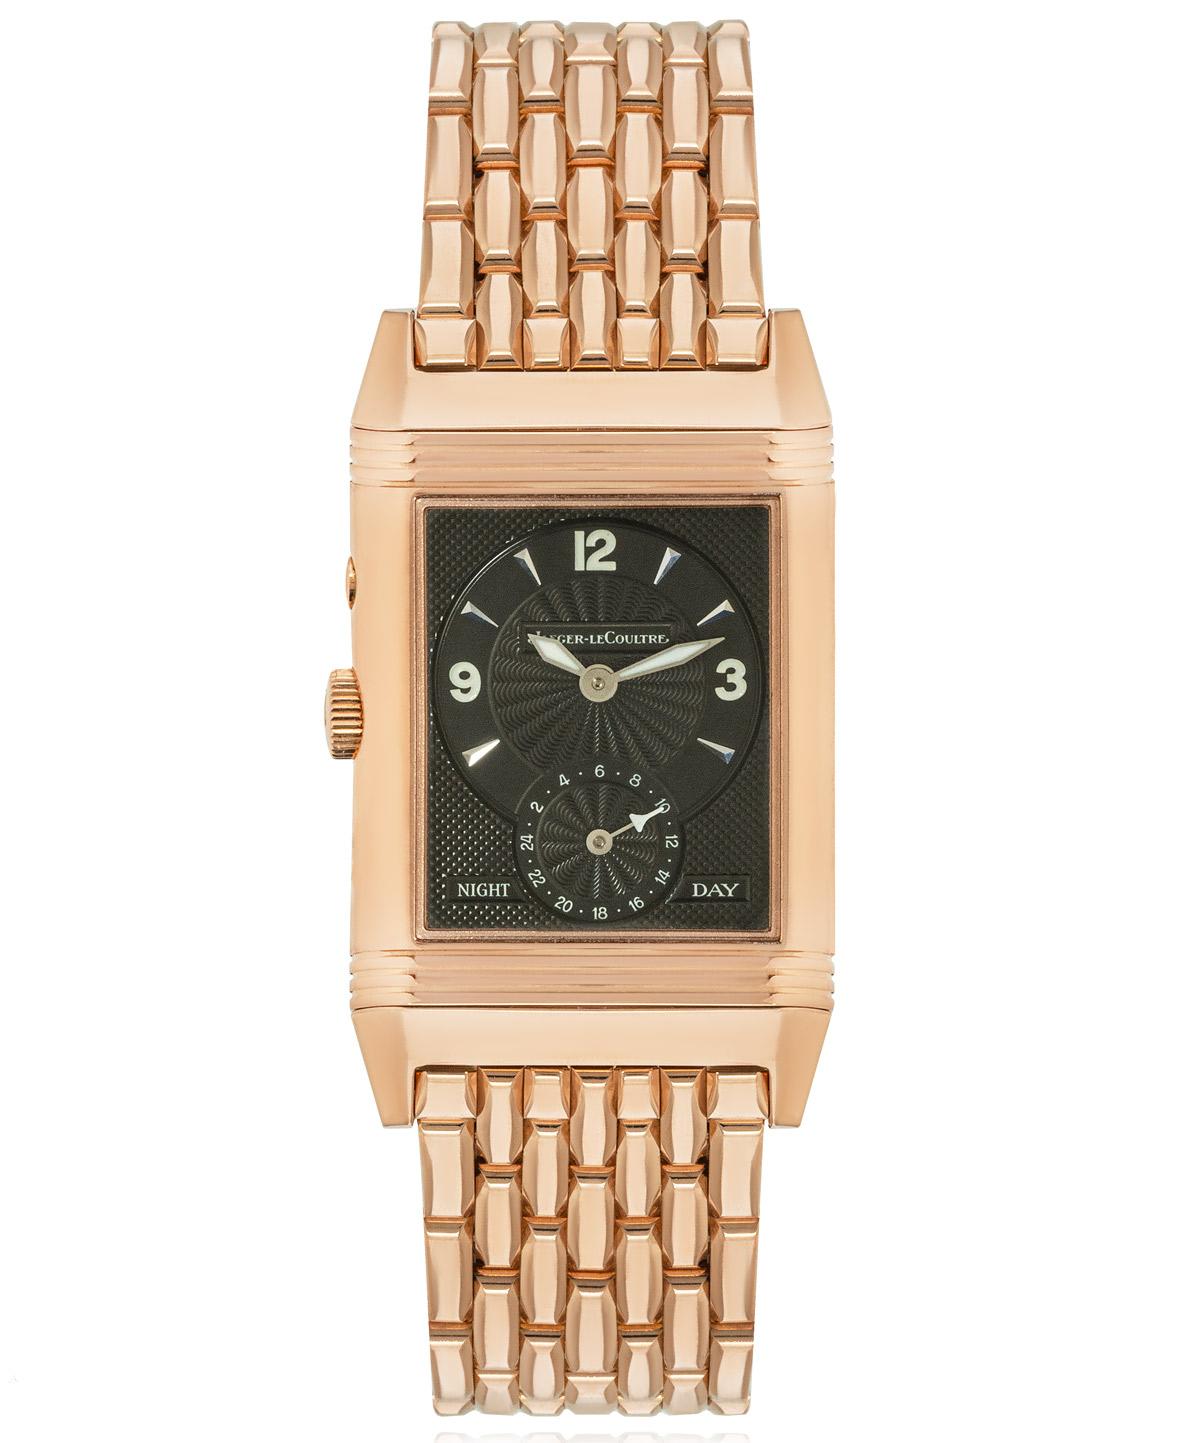 A 26mm rose gold Reverso by Jaeger LeCoultre. Features a silver dial with arabic numbers, a small seconds and a reversible side featuring a black dial with a day/night indicator as well as a second time zone which can be adjusted via a simple push